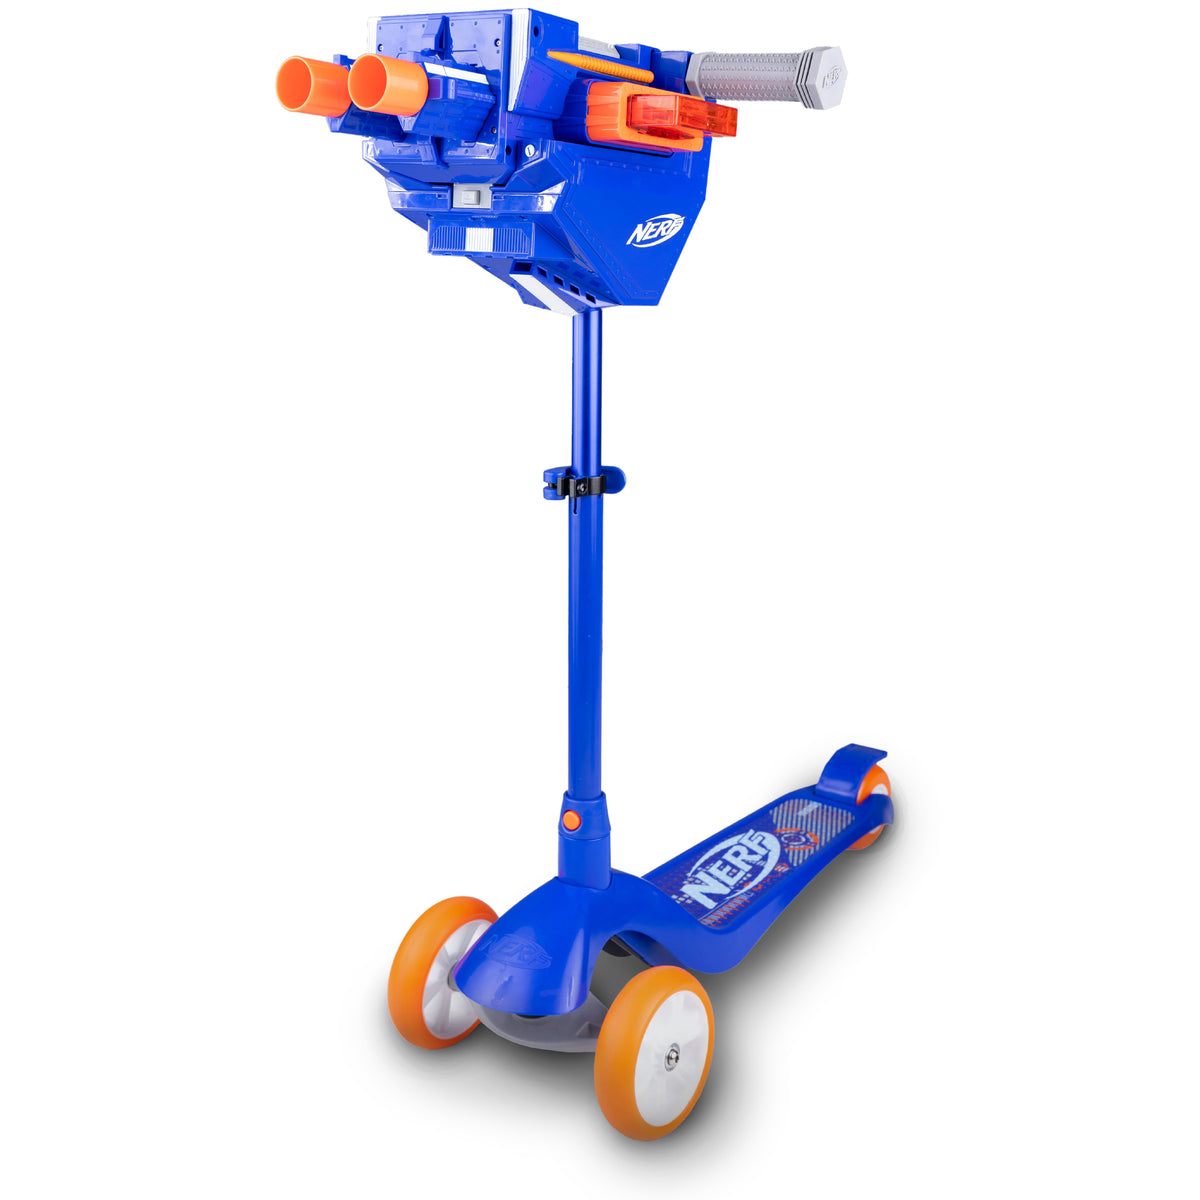 NERF Blaster Scooter Dual Trigger, 3 Wheel Kick Scooter